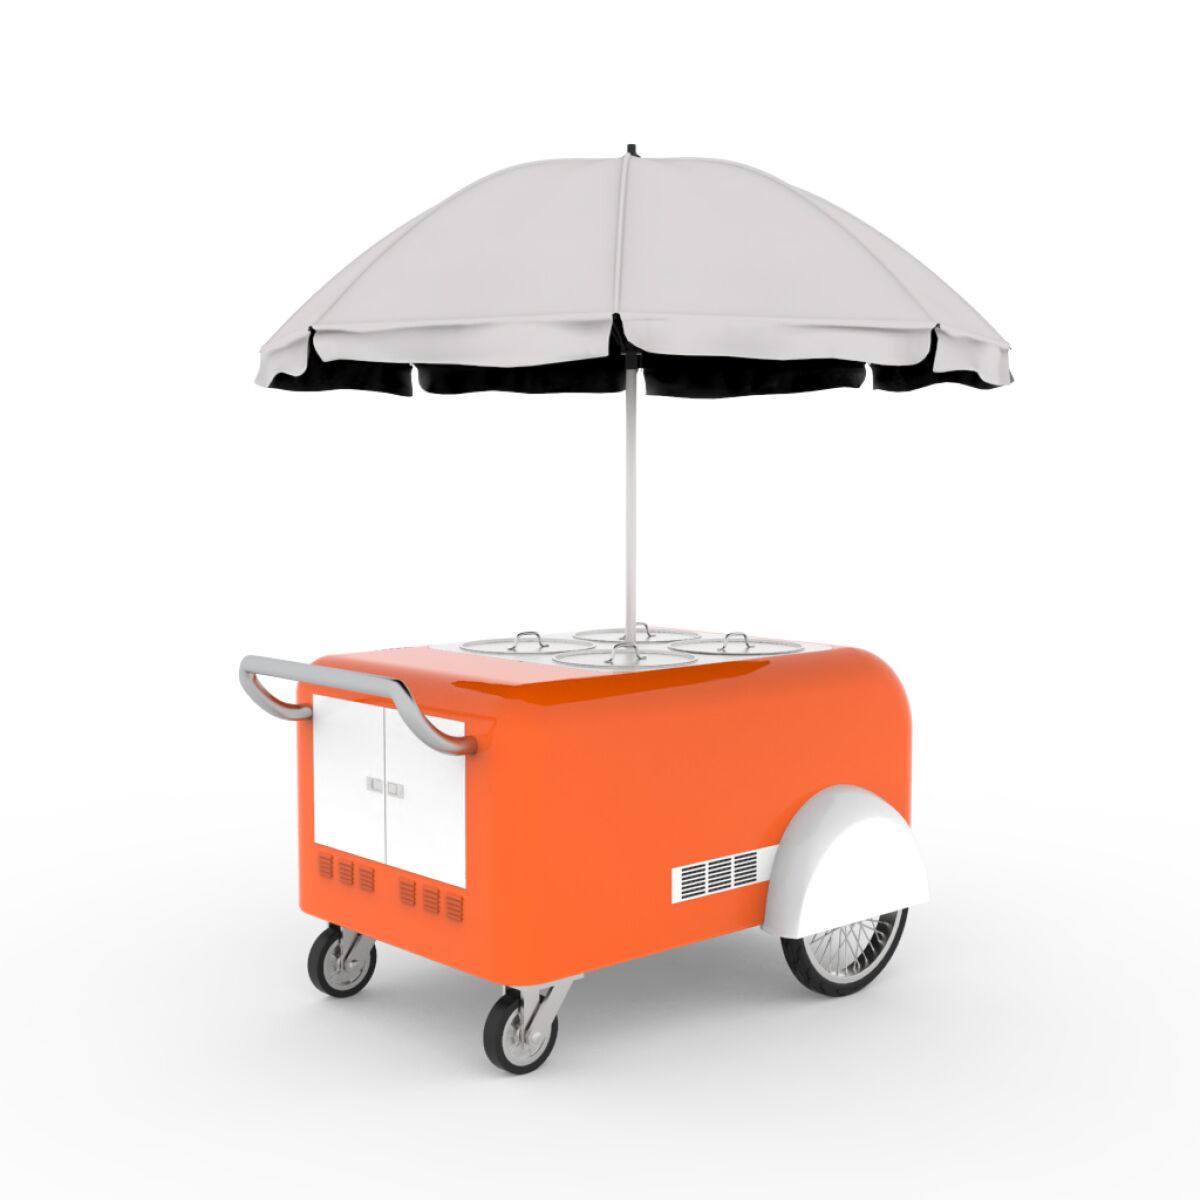 A rendering shows an orange-colored pushcart with an umbrella.